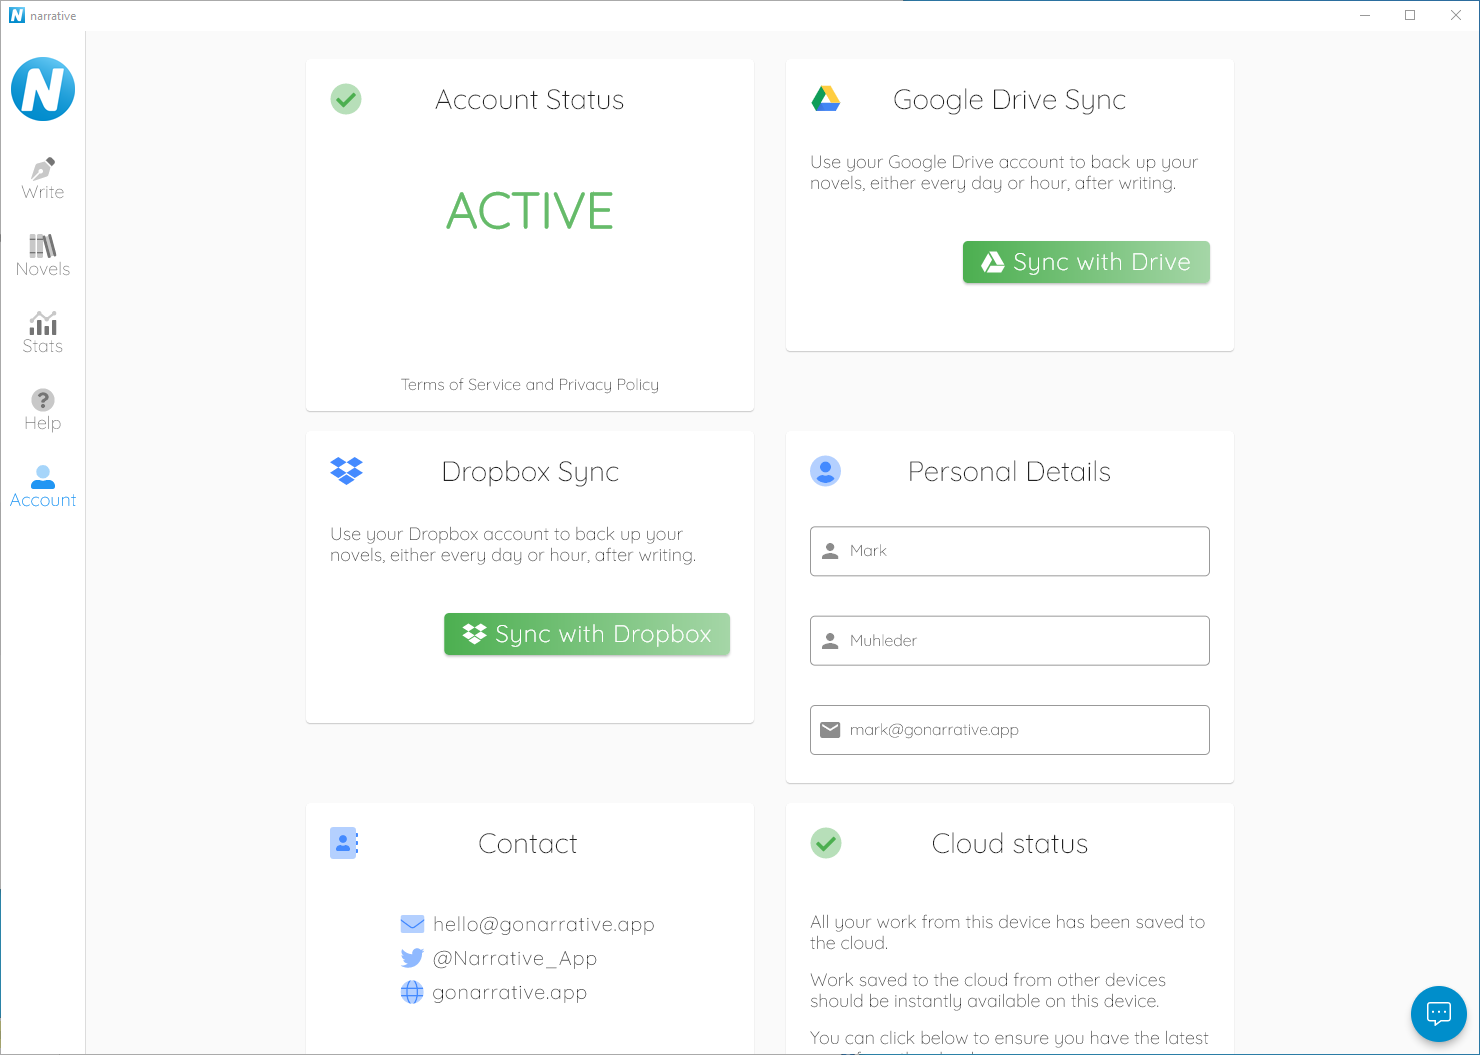 Backup your work to Google Drive or Dropbox.